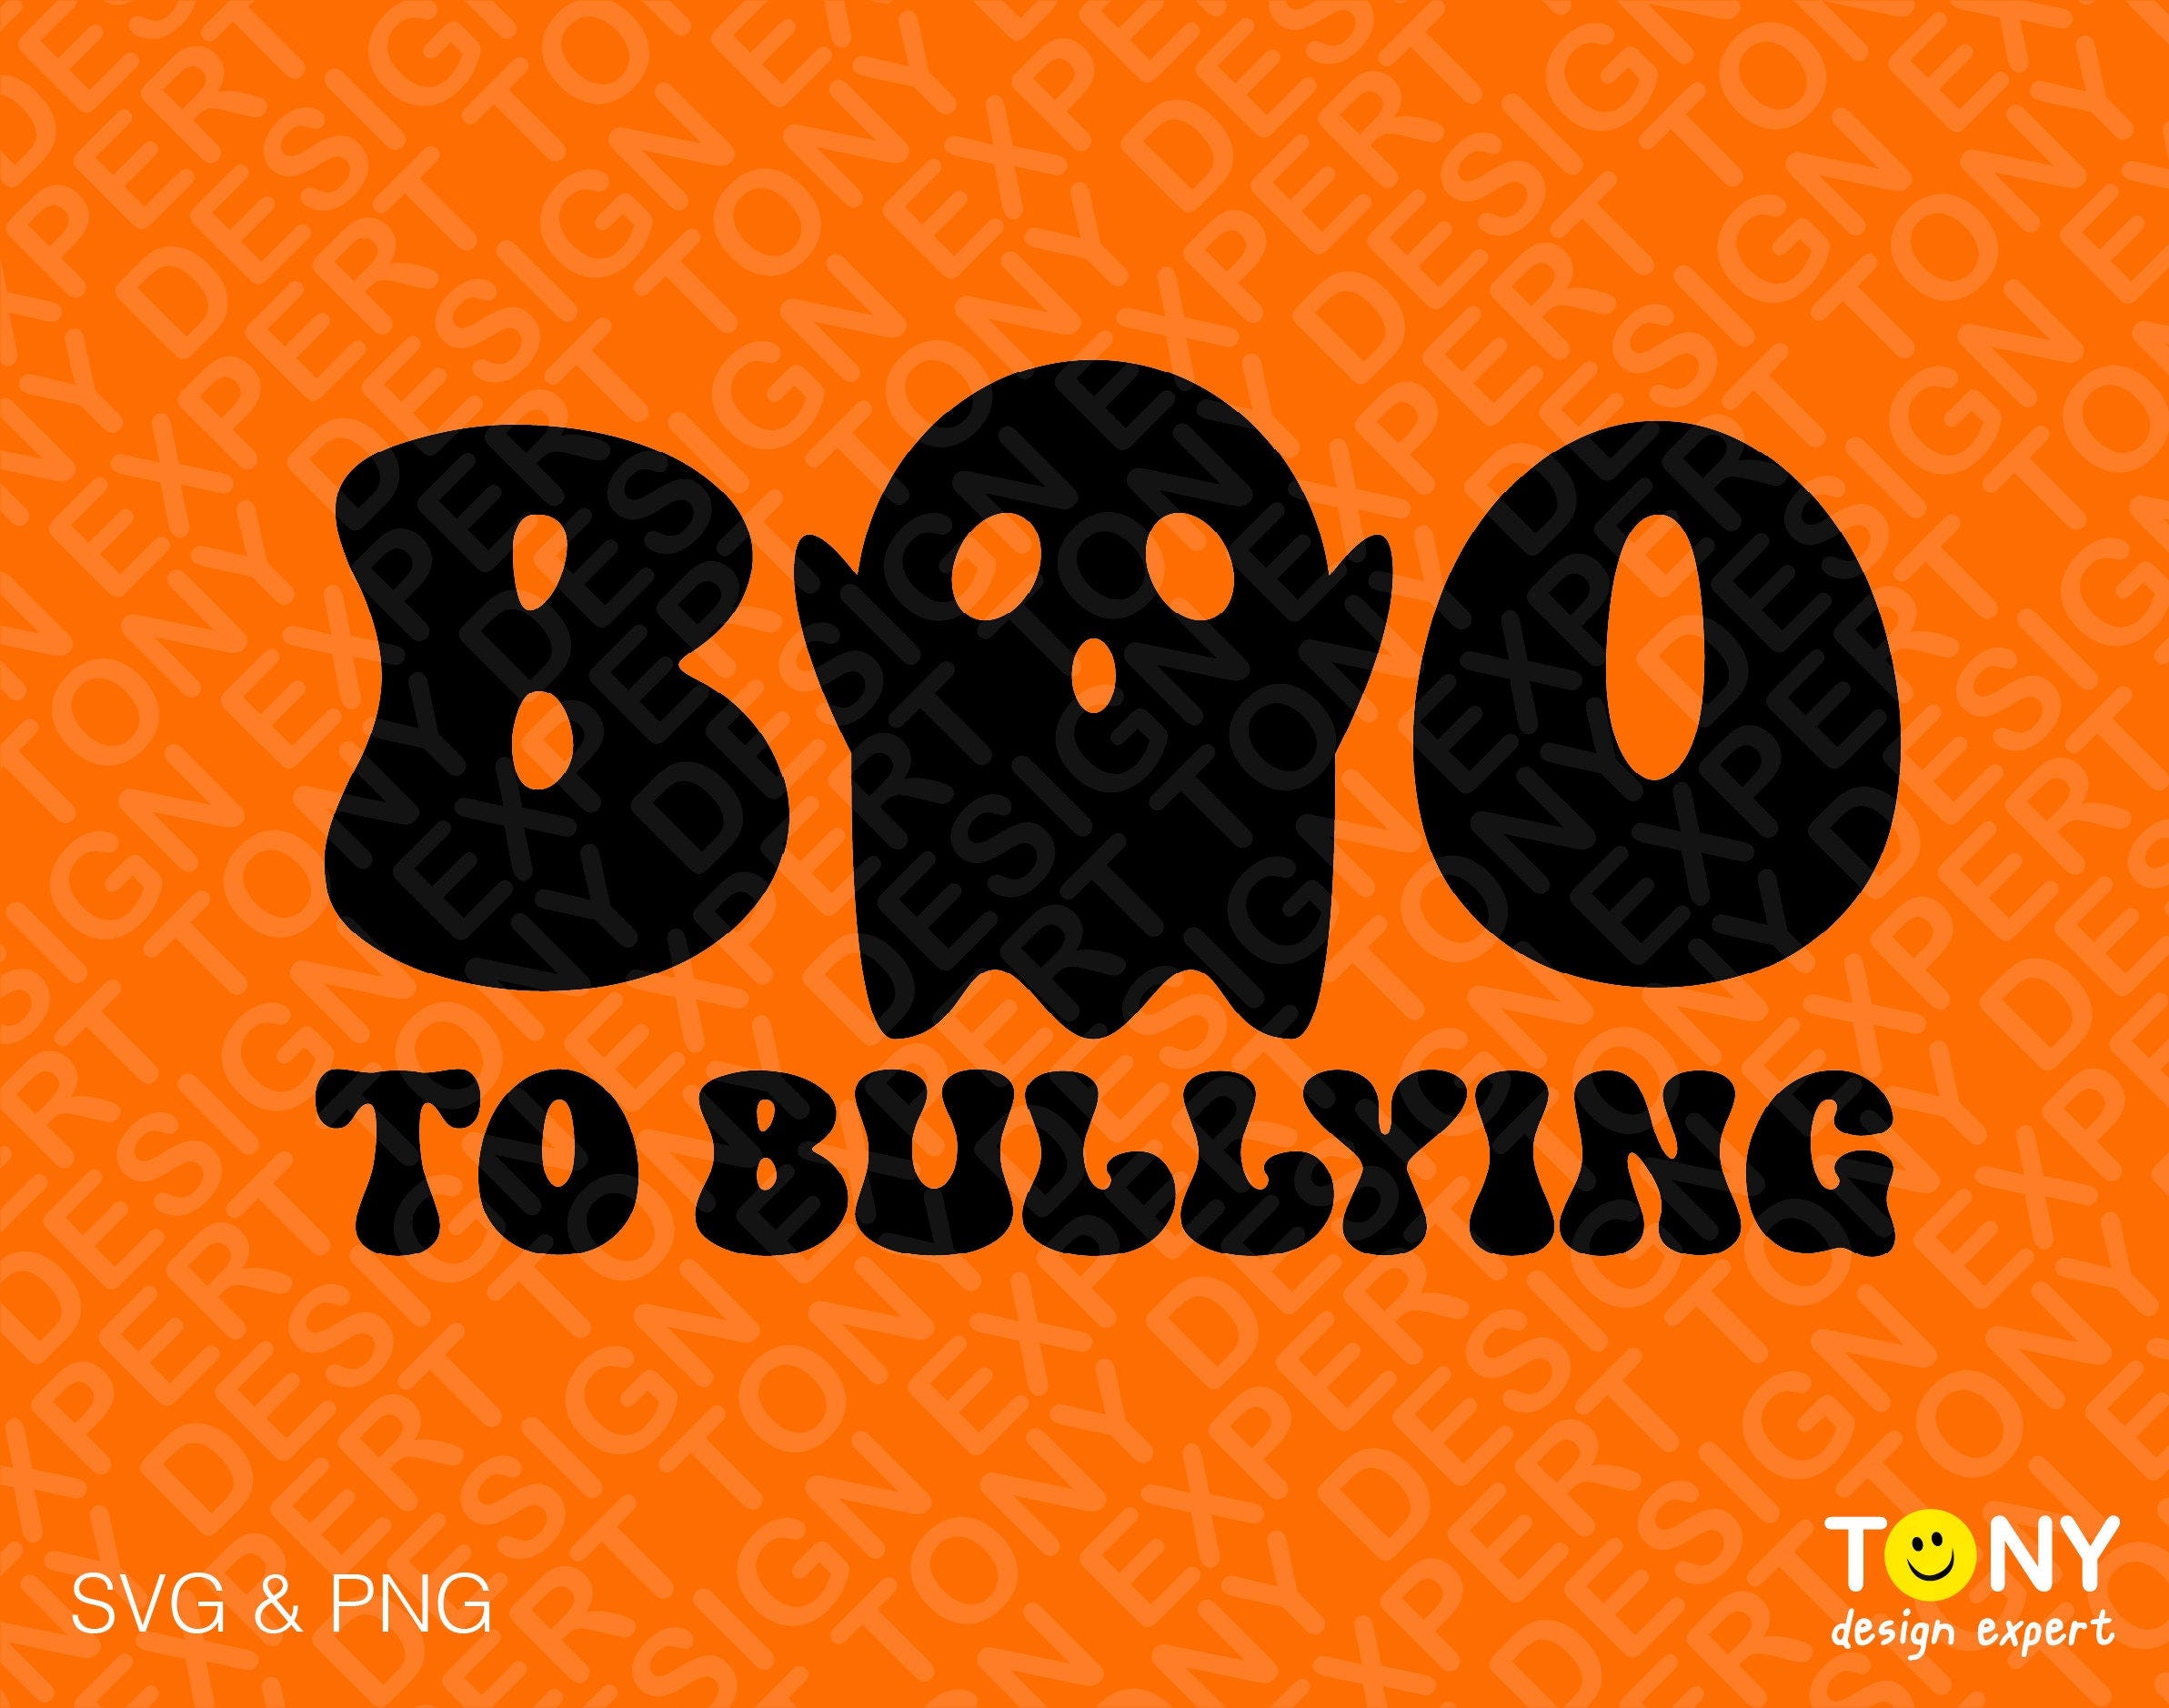 Boo To Bullying Svg Png, Stop Bullying, End Bullying Svg, Trendy Halloween Bullying Prevention Digital Download Sublimation PNG & SVG Cricut